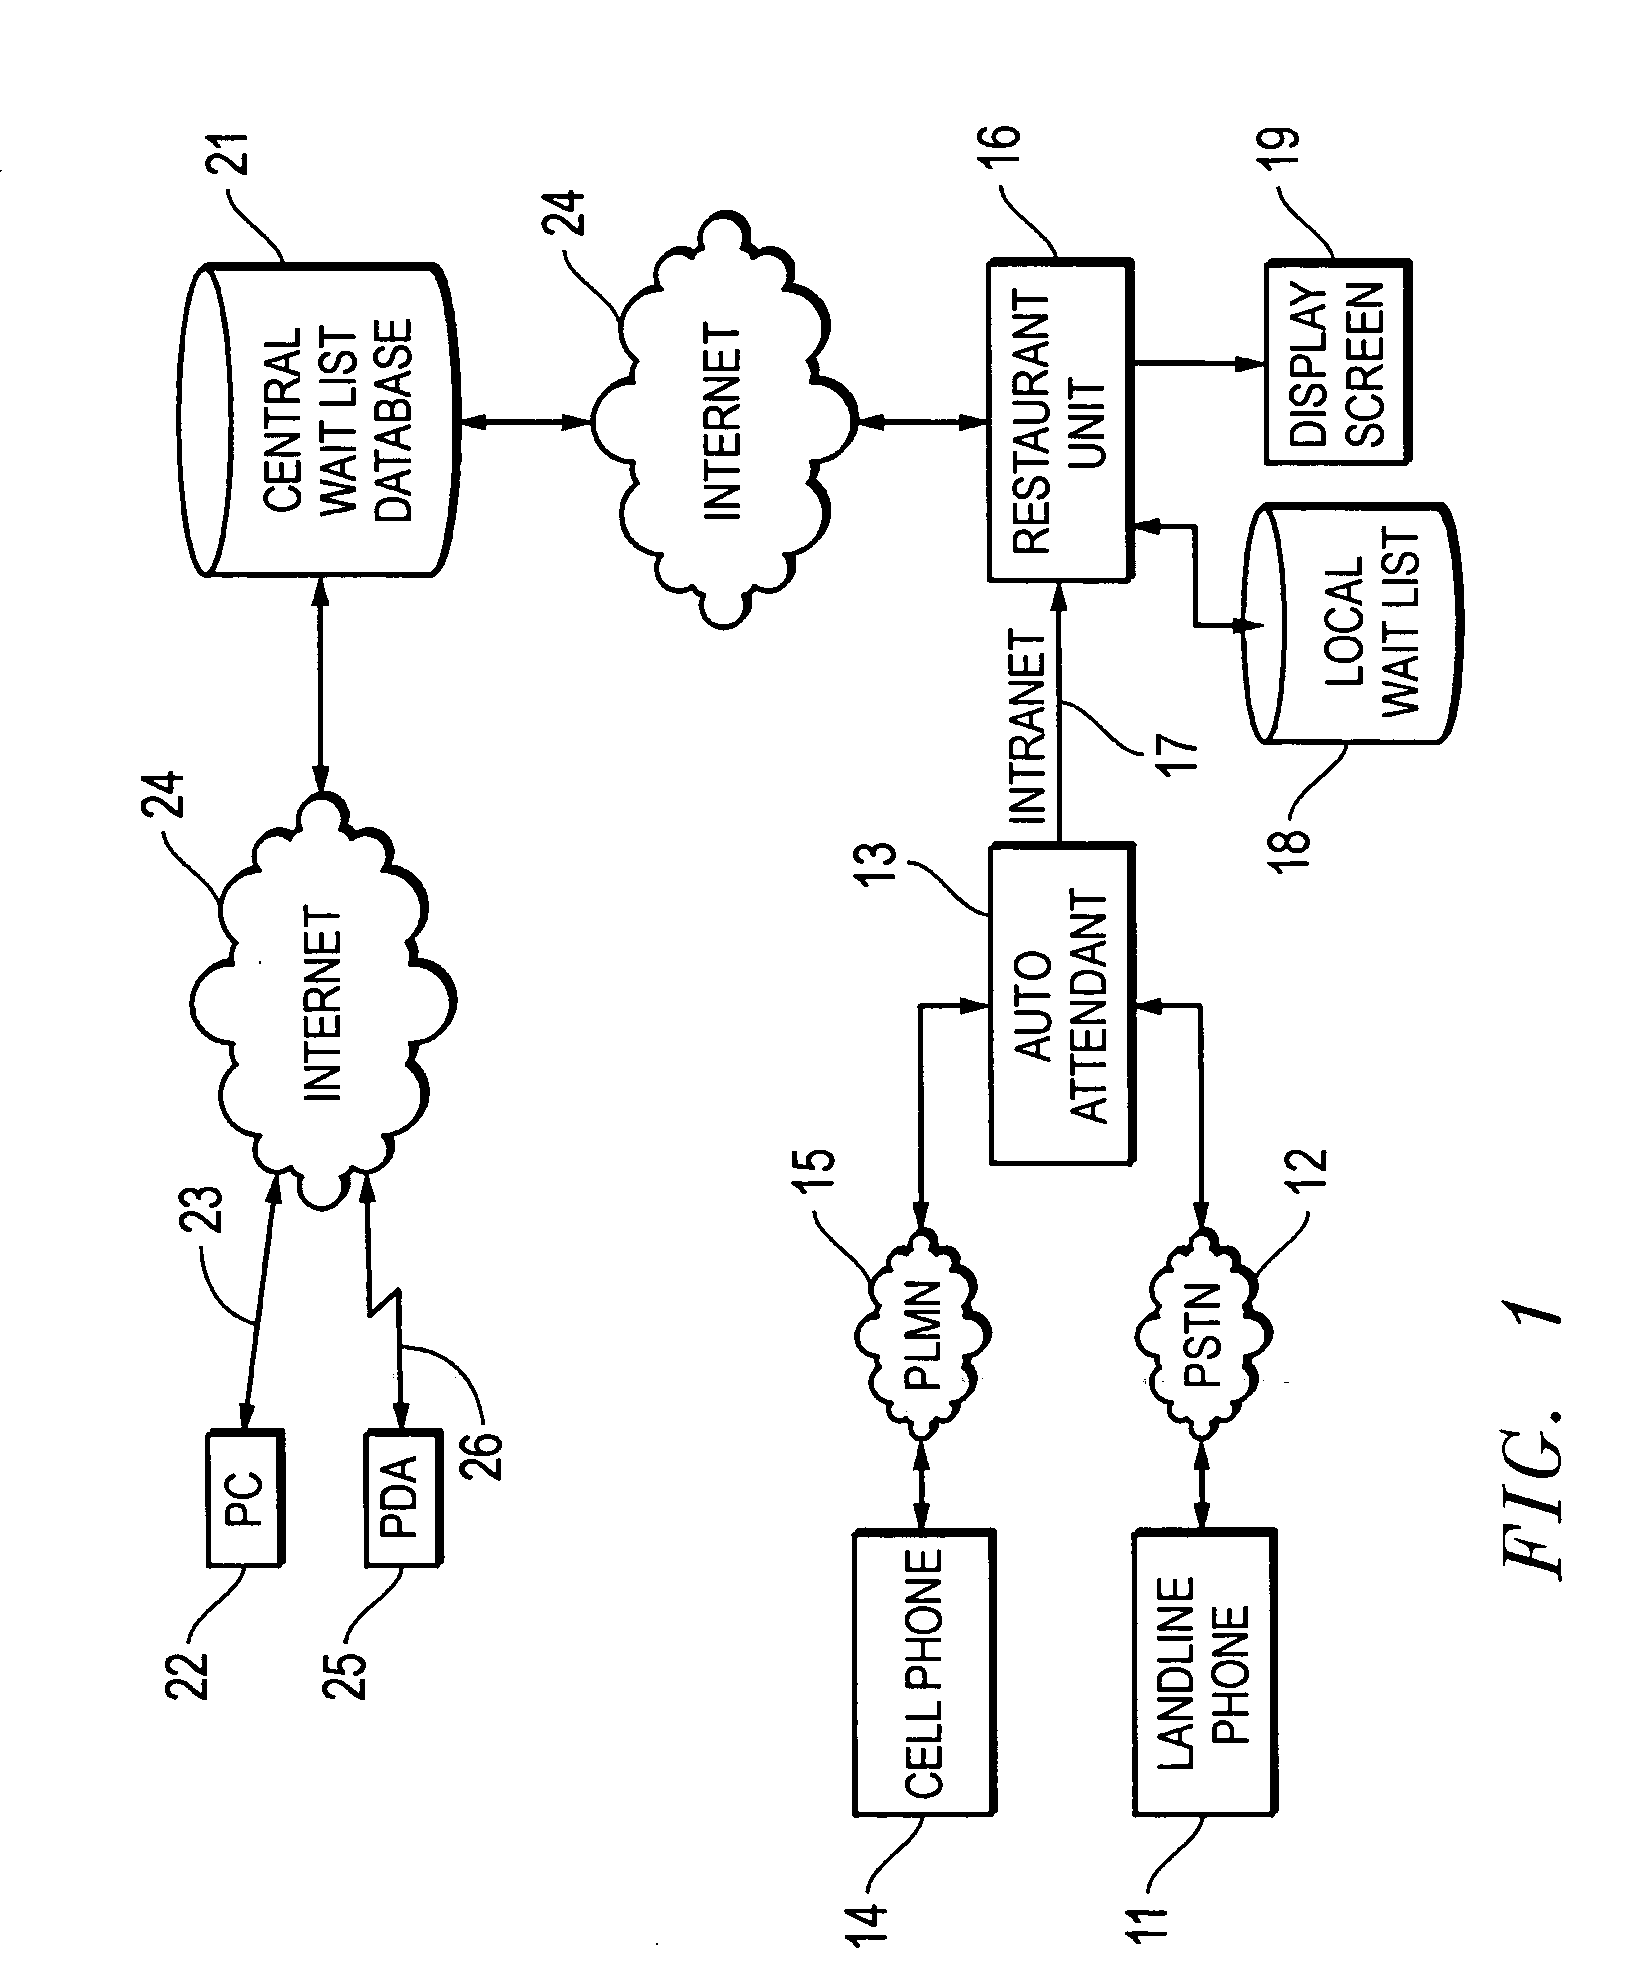 System and method for automated dynamic wait listing